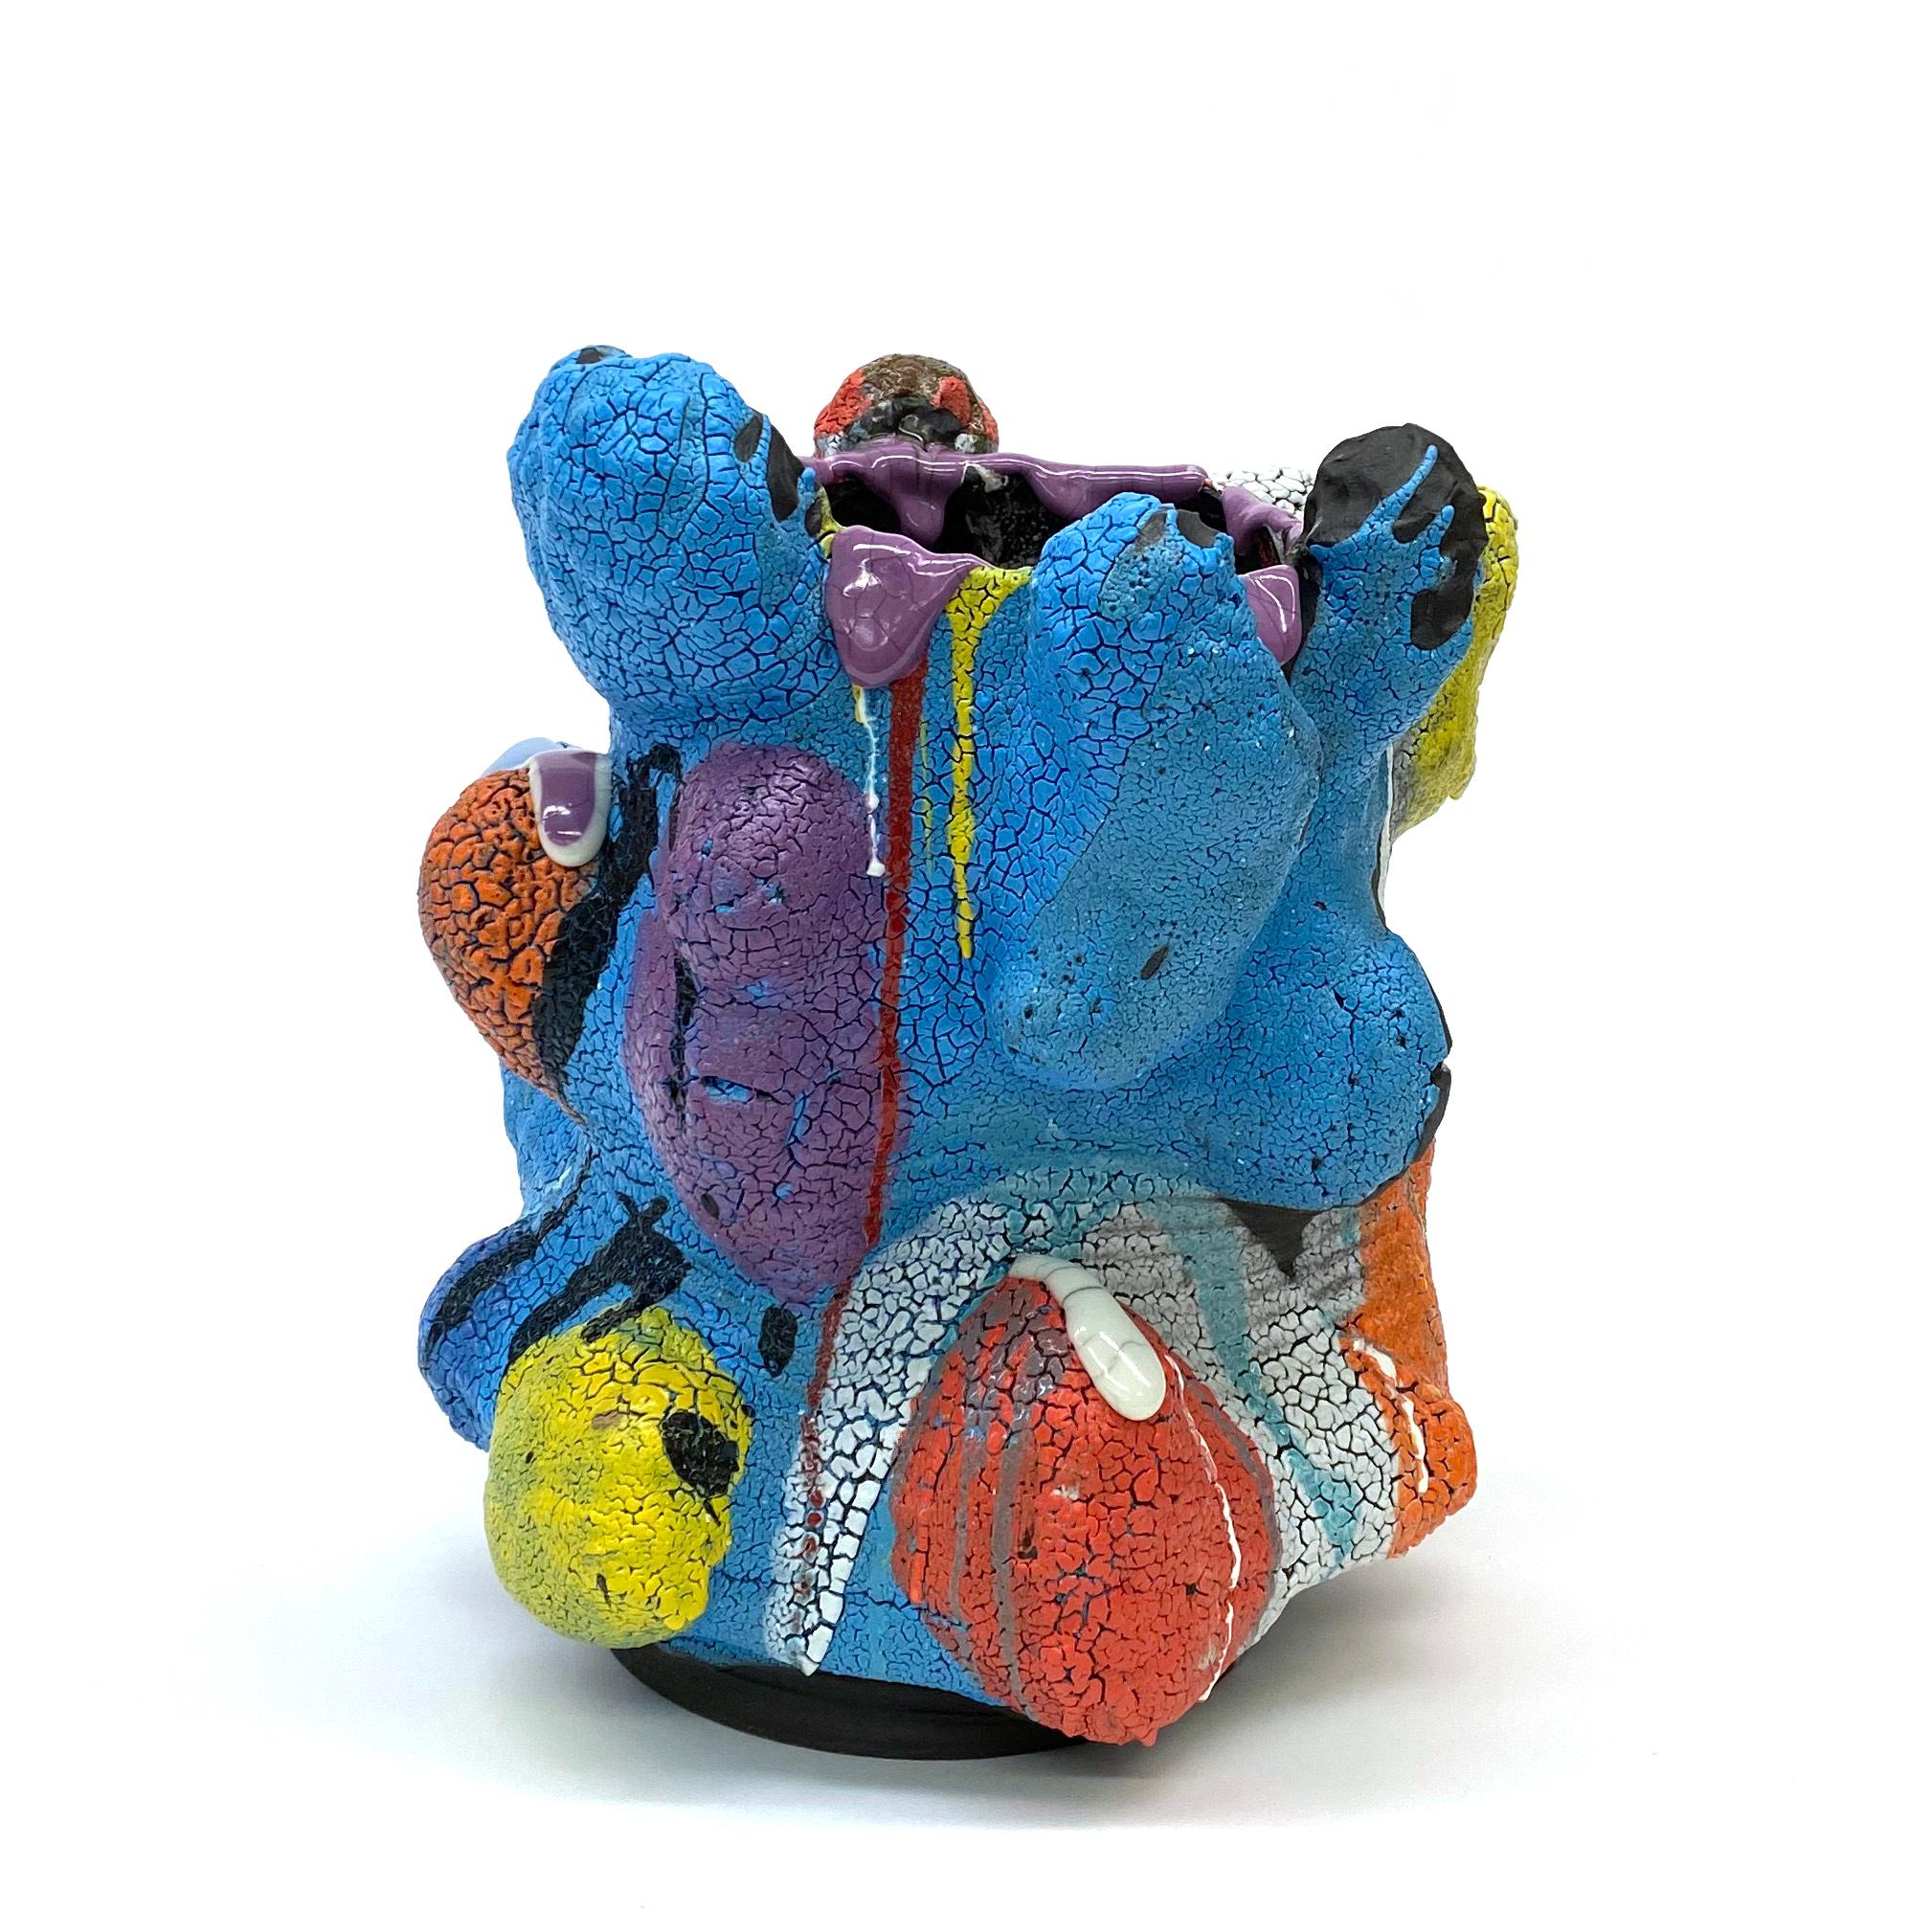 	Vince Palacios (b.1961, Flint, Michigan) has been working in the fields of ceramics since 1992 and currently serves as Professor of the Ceramics Department at El Camino College in Torrance, California. Literally overflowing with bright colors and